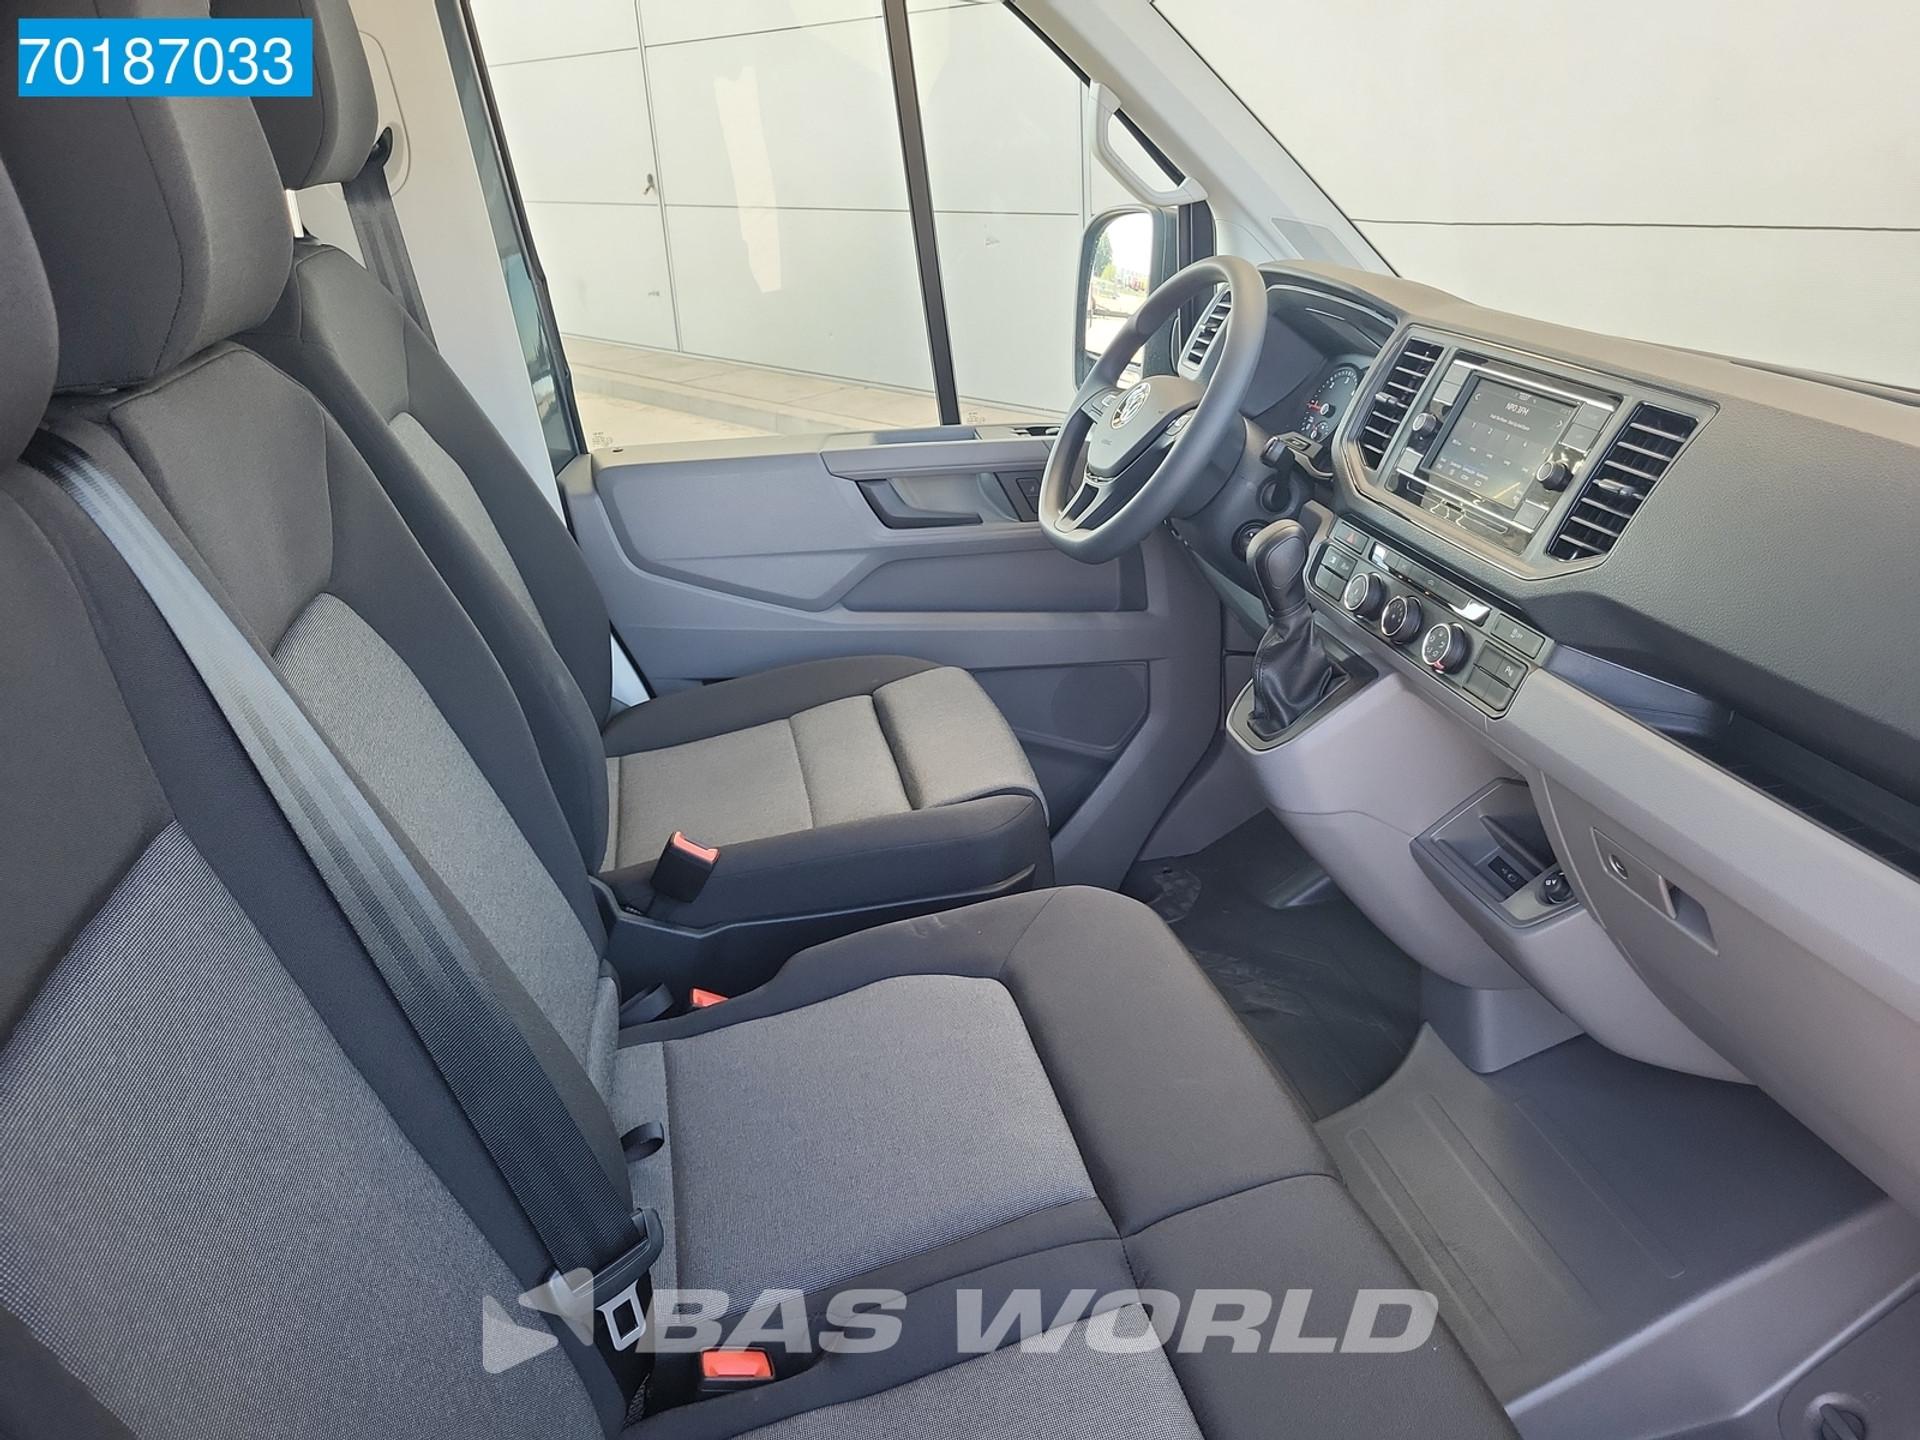 Foto 12 van Volkswagen Crafter 140pk Automaat L3H3 Imperiaal 18''Velgen Sidebars ACC LED Airco Cruise L2H2 11m3 Airco